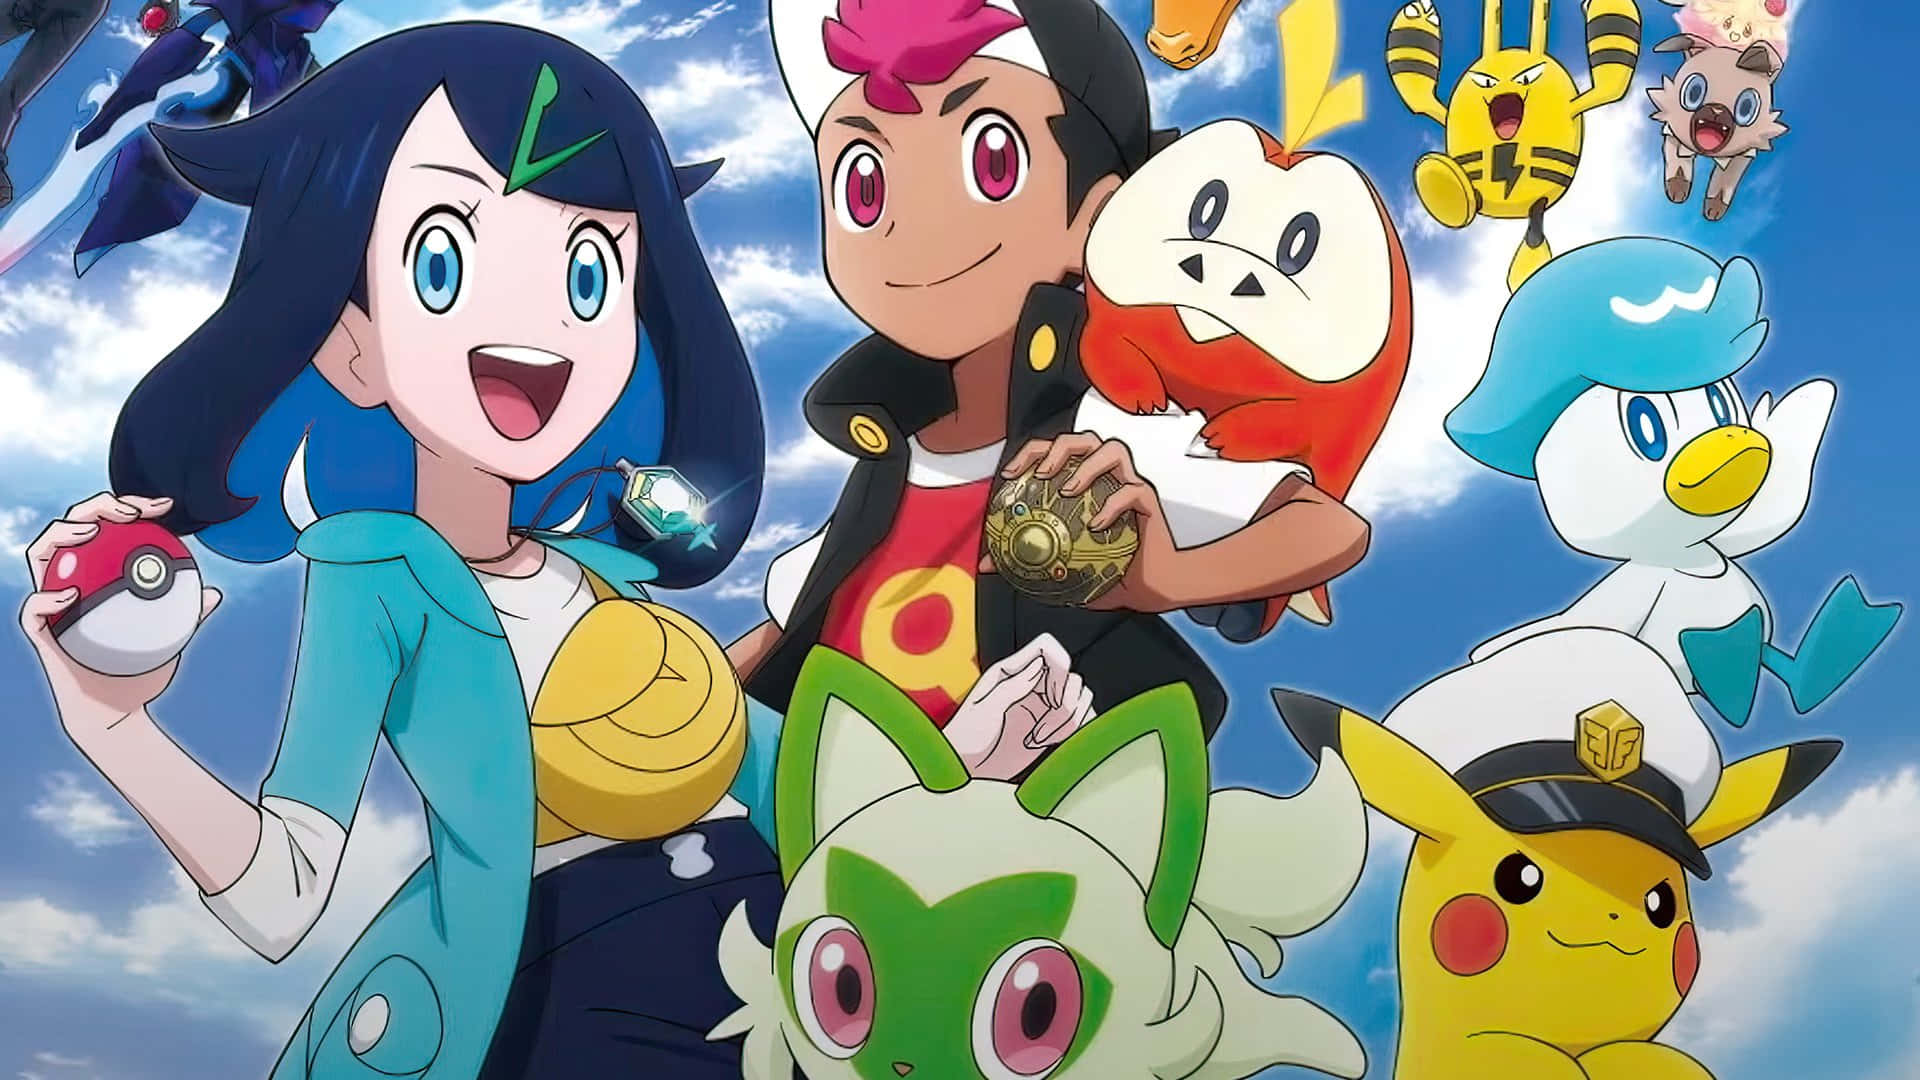 Enjoy your favorite episodes of the classic Pokemon TV shows Wallpaper